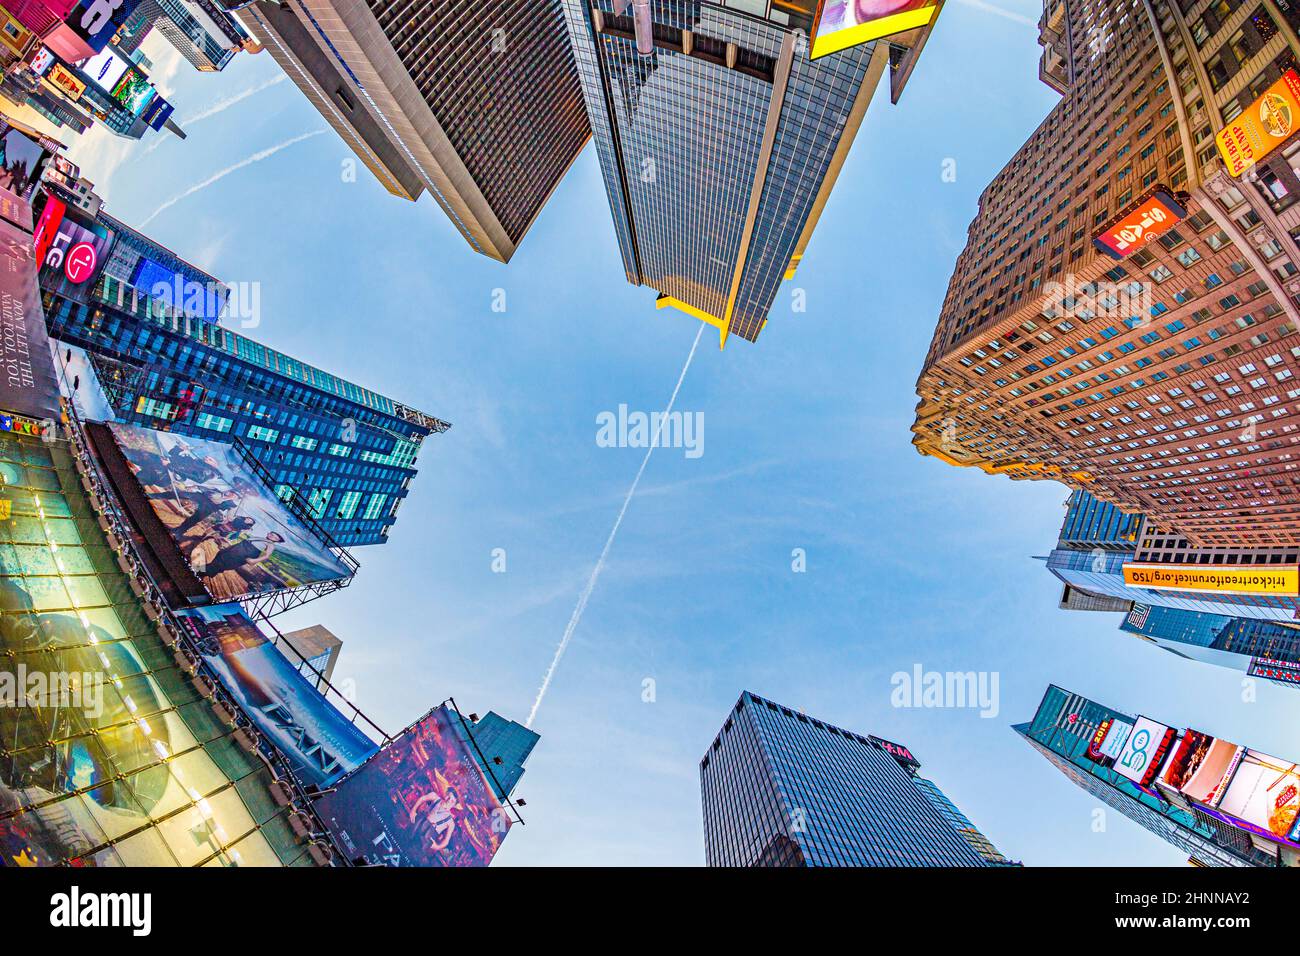 Times Square, featured with Broadway Theaters and huge number of LED signs Stock Photo